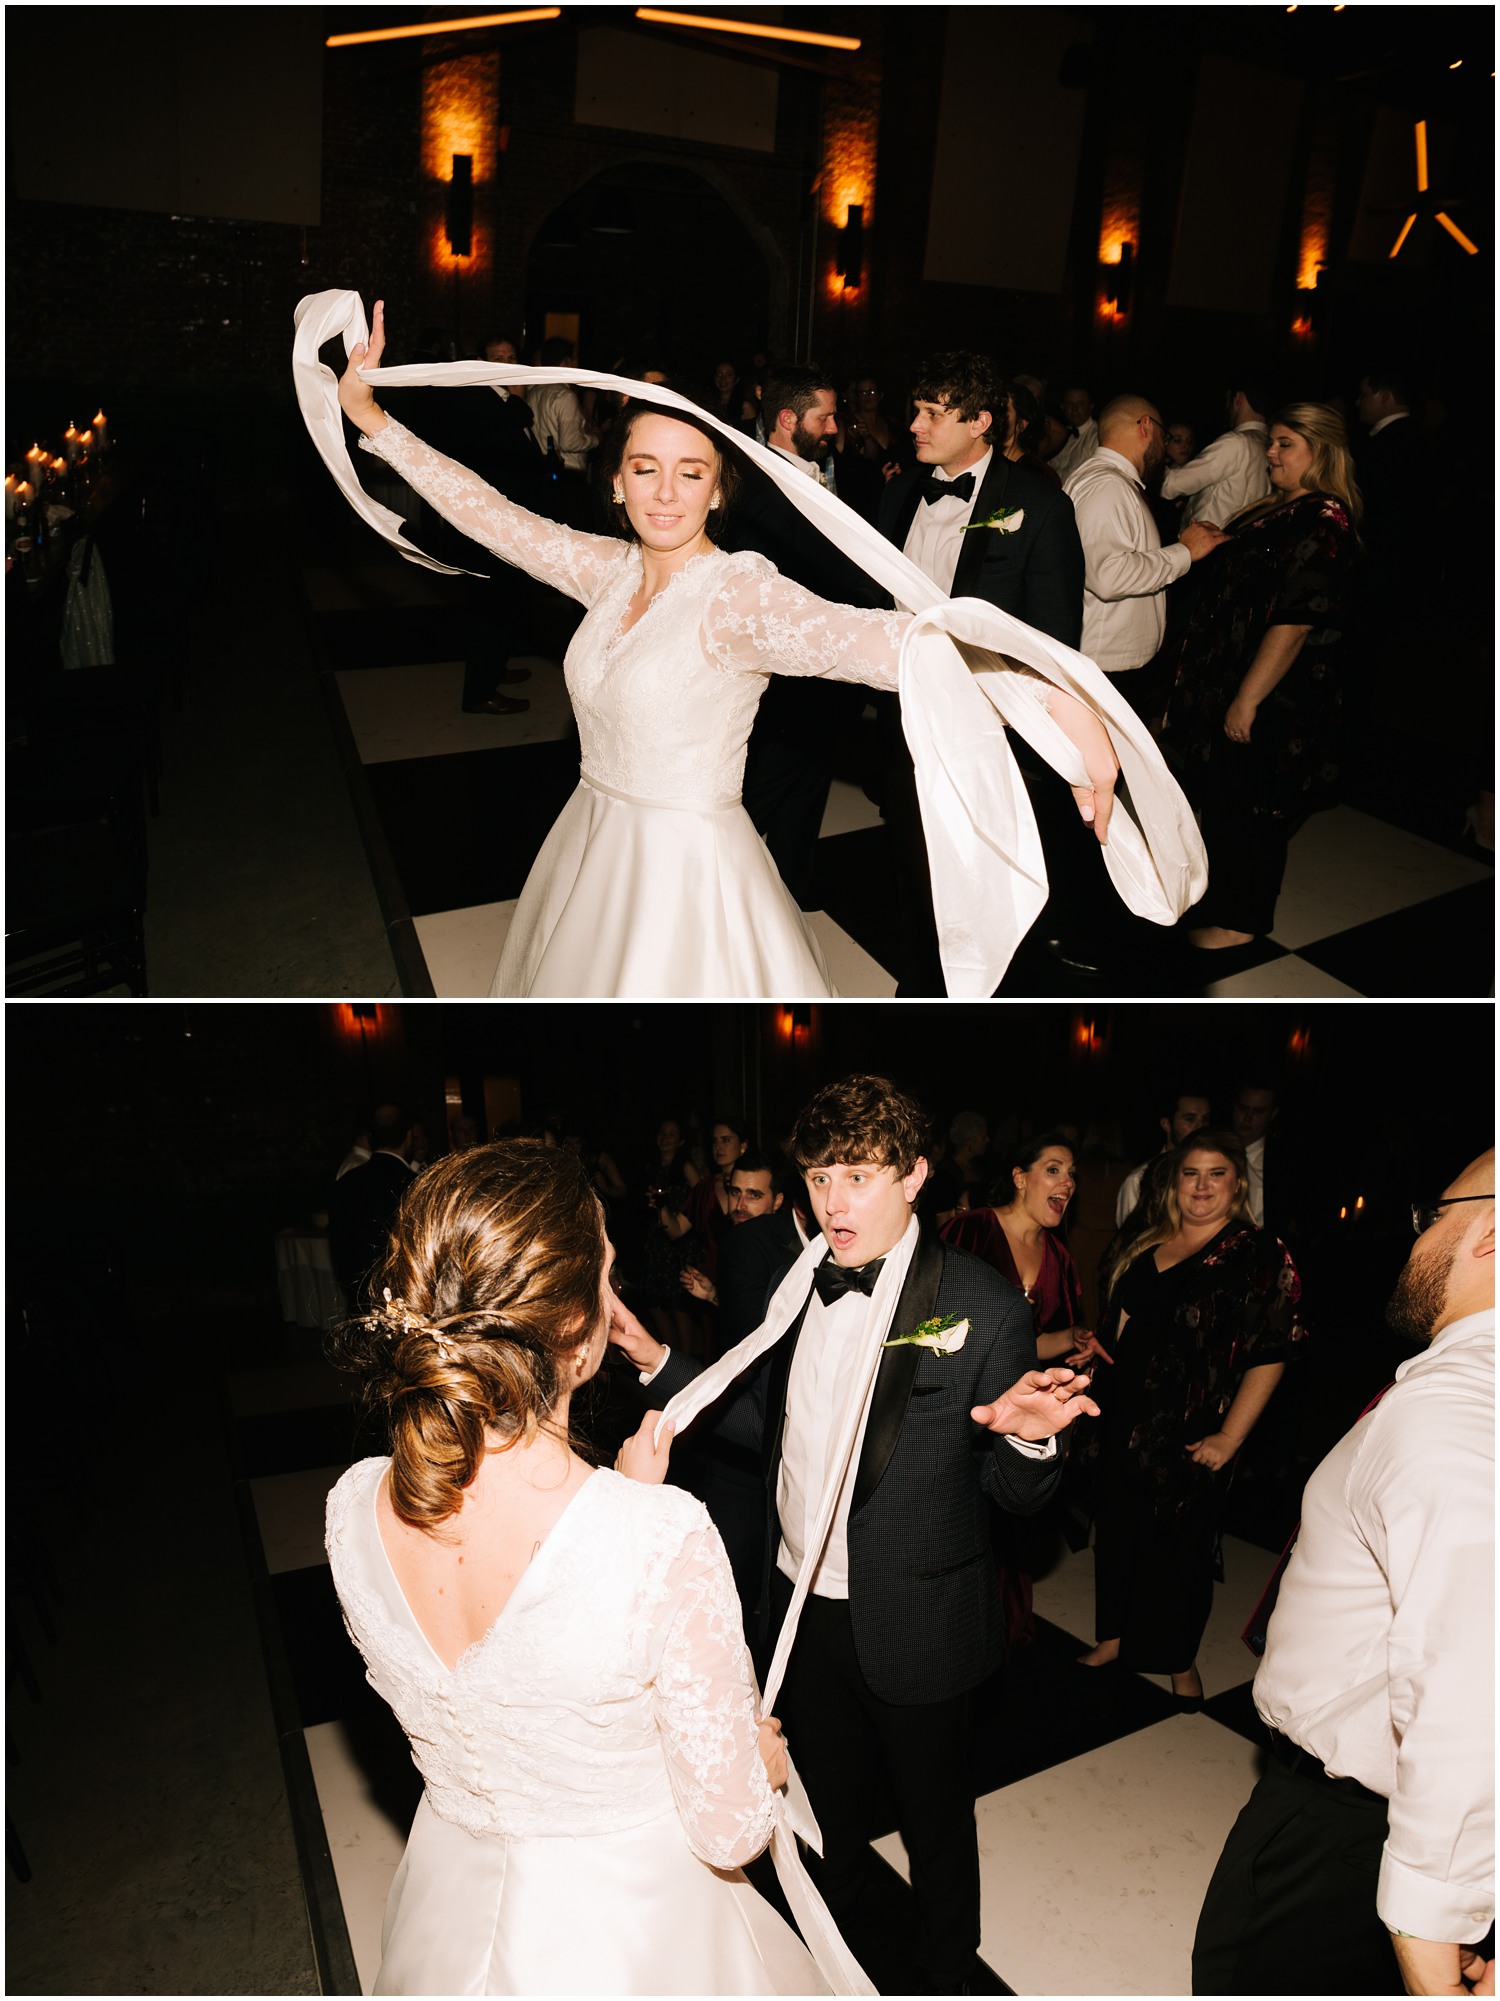 Cadillac Service Garage wedding reception dancing photographed by Chelsea Renay Photography